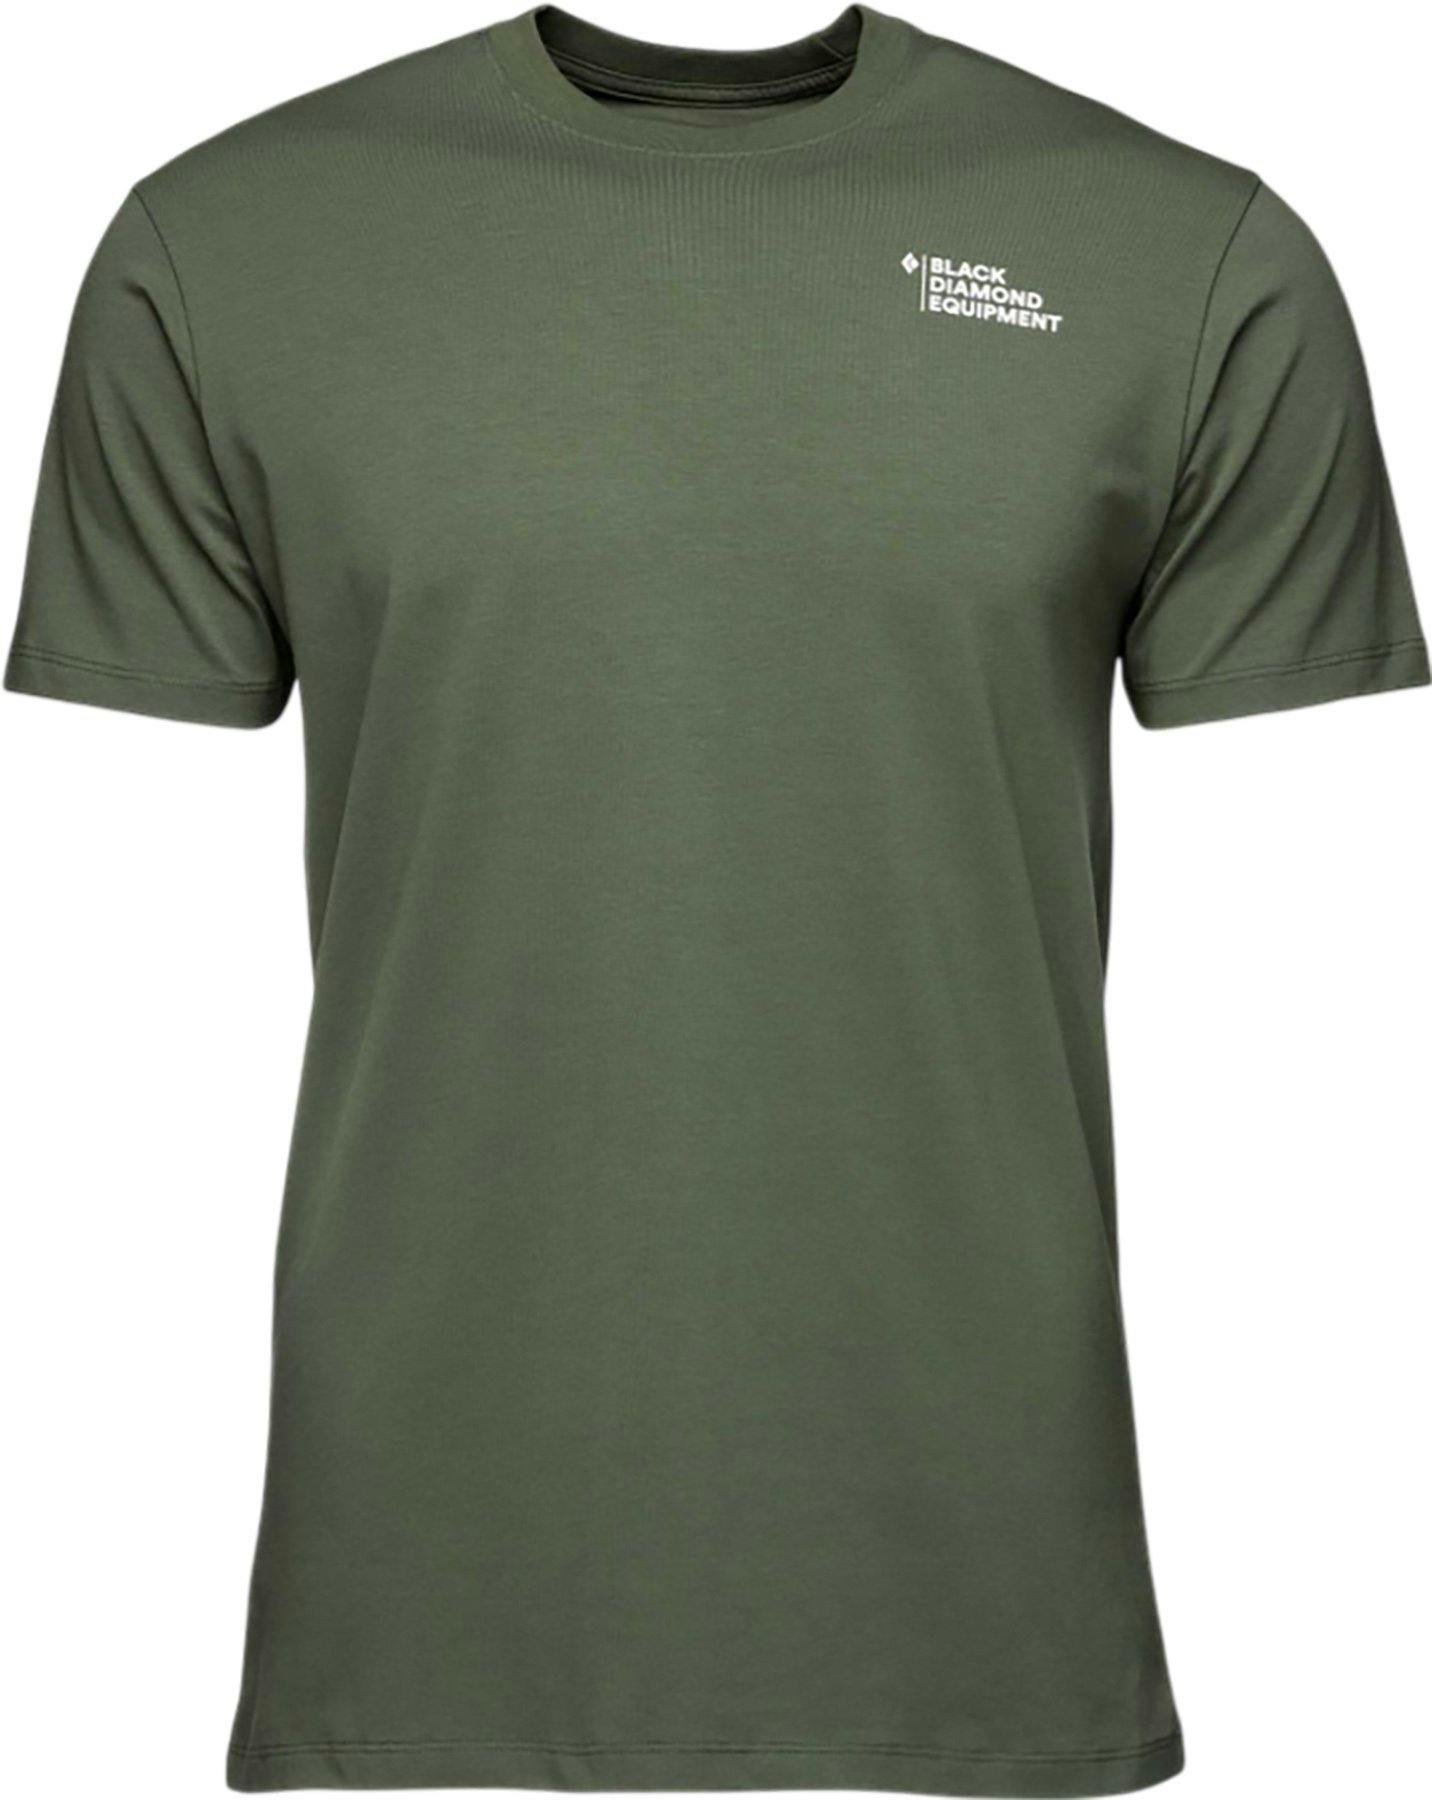 Product image for Peaks T-Shirt - Men's